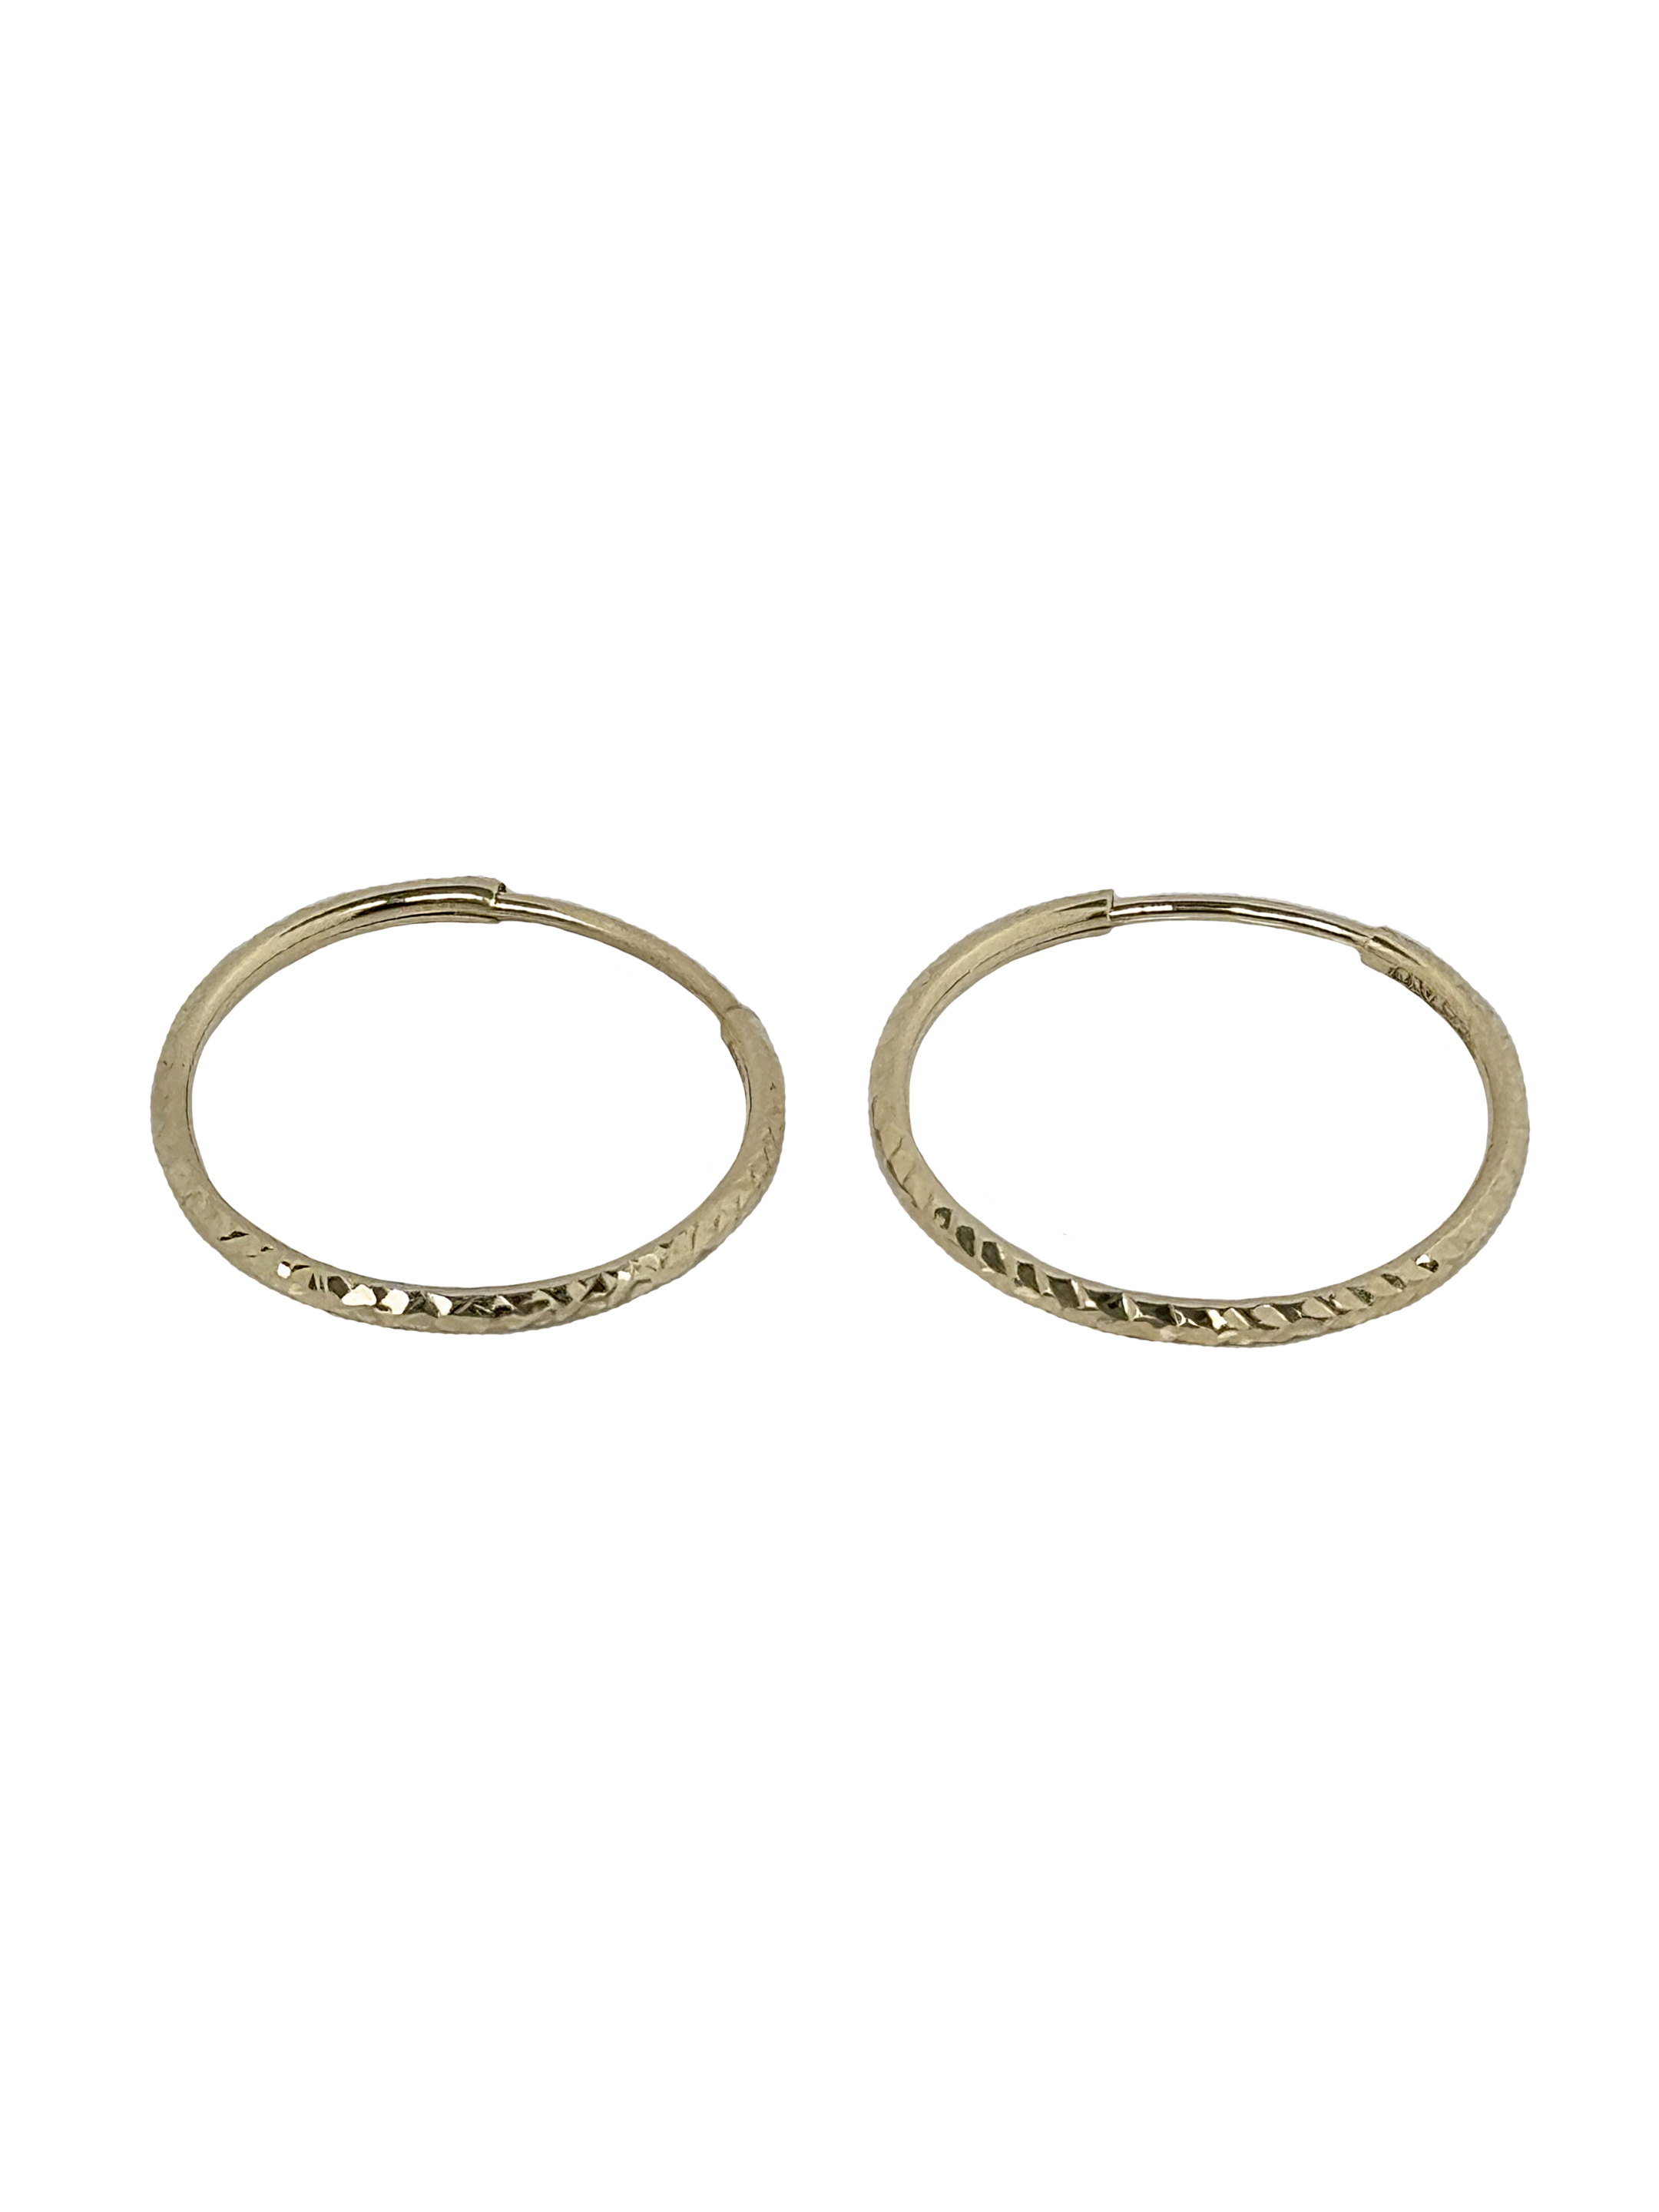 Gold earrings with Circles engraving